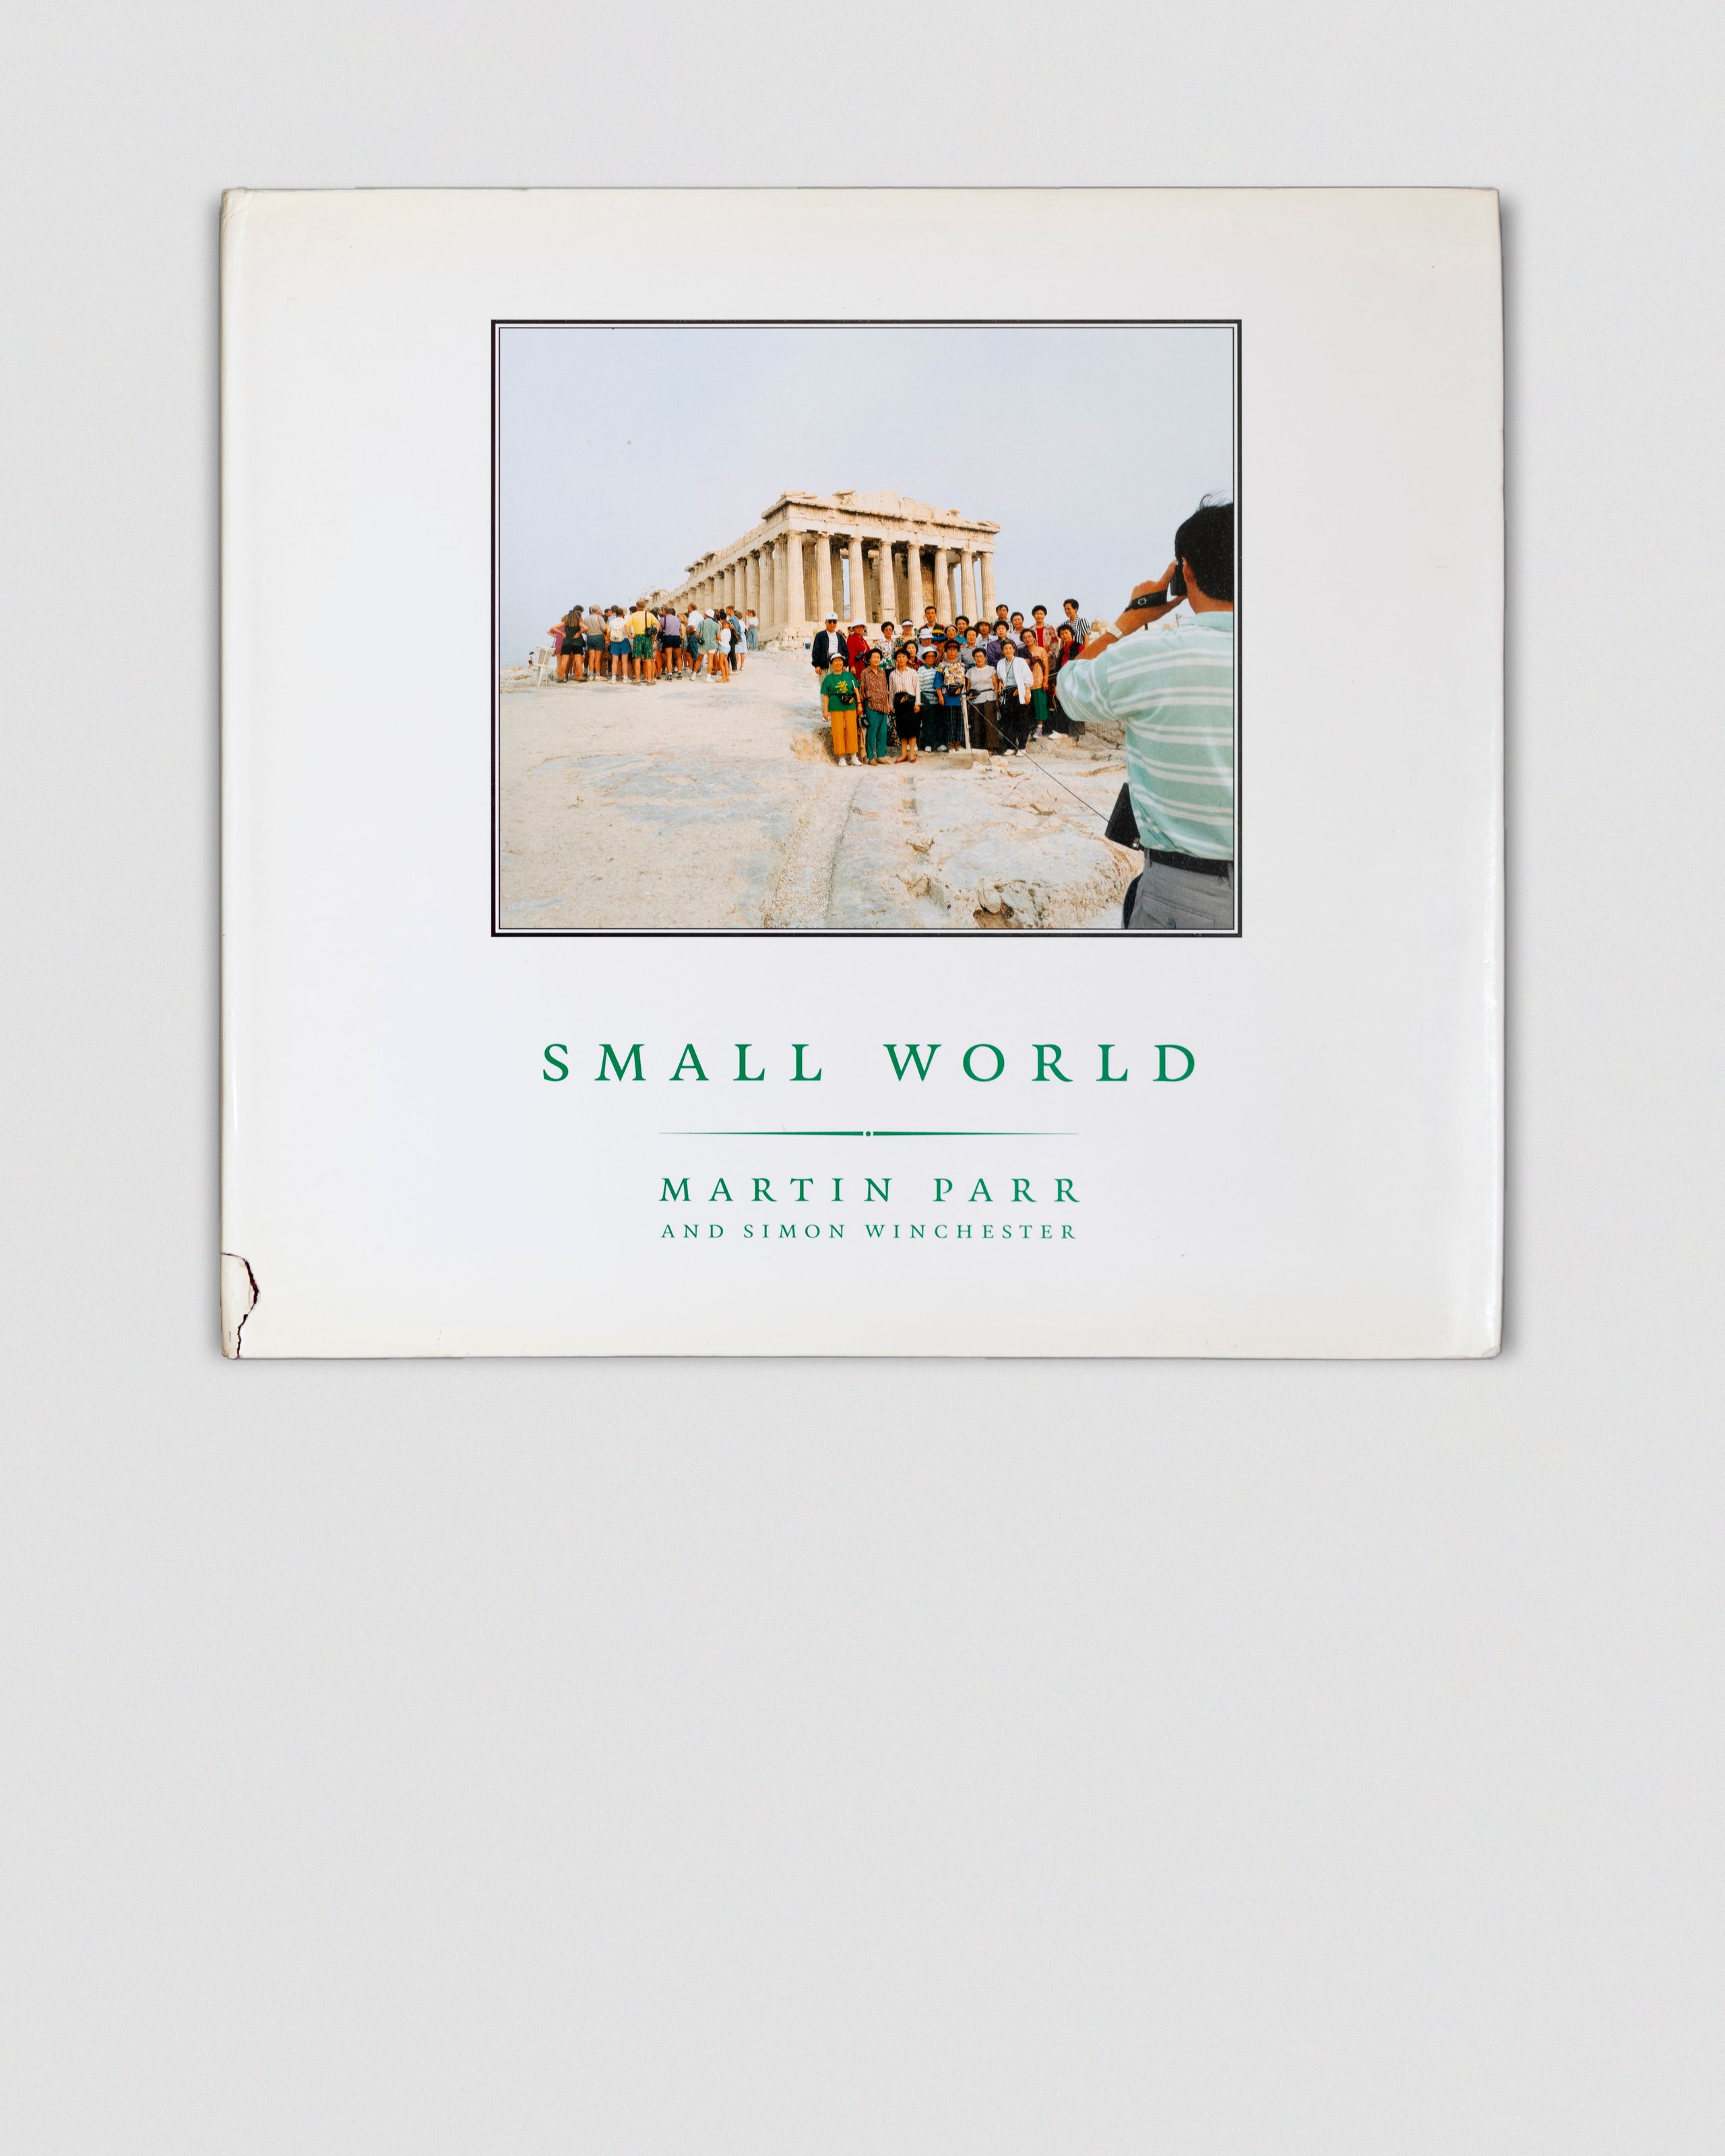 Small World - Martin Parr (SIGNED) ($90) - In Form Library